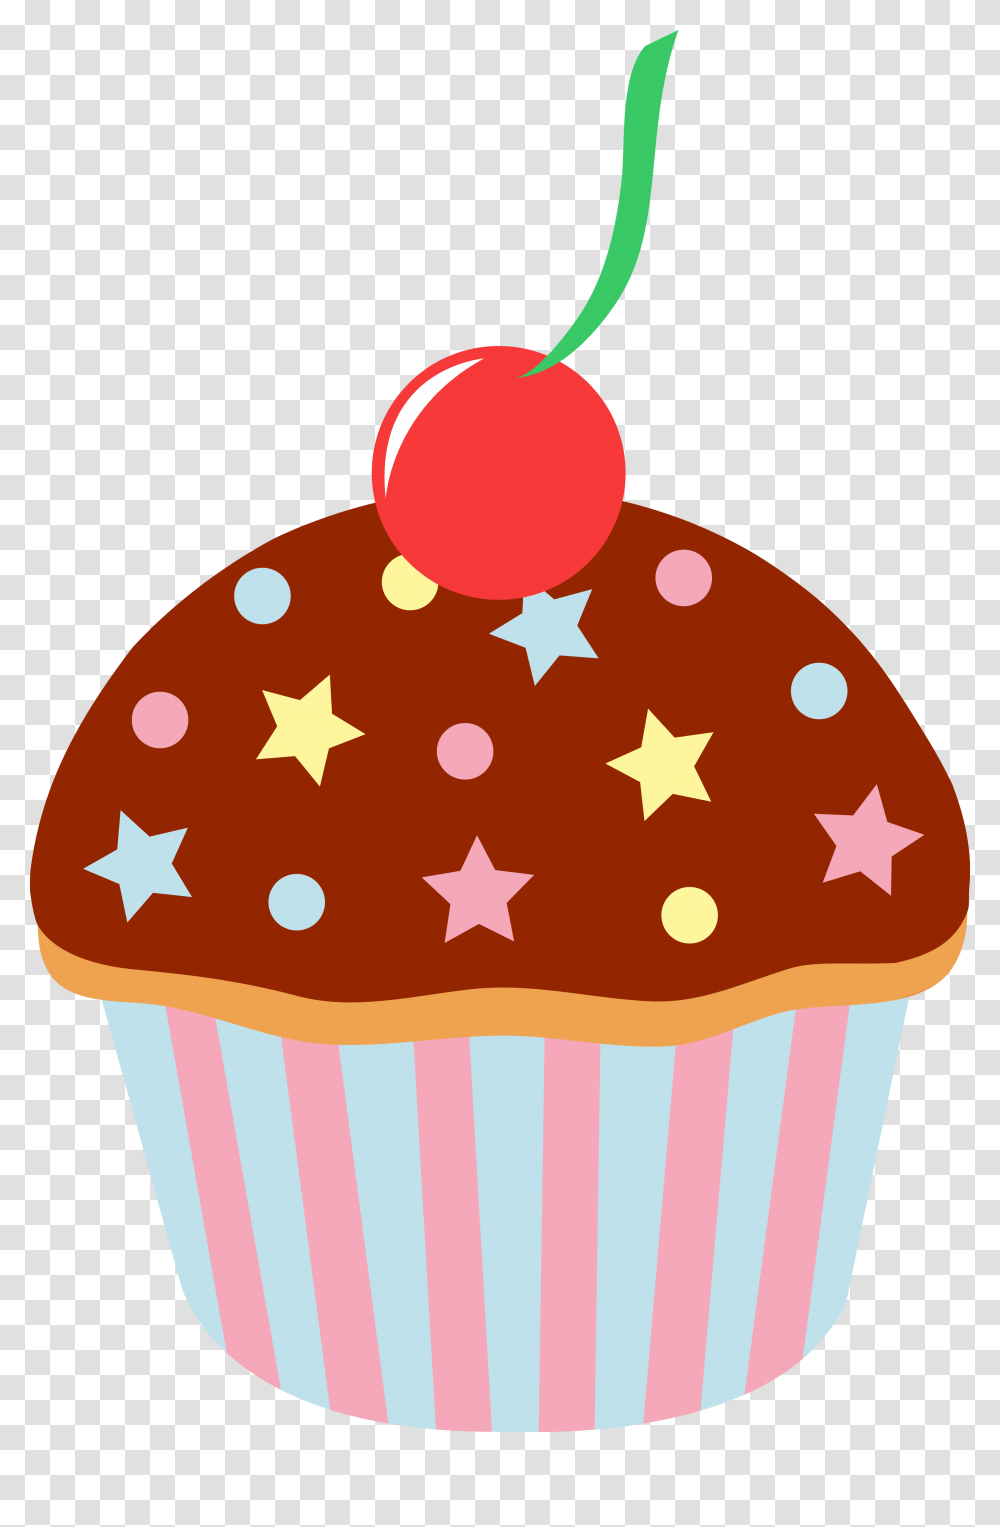 Chocolate Cupcake With Sprinkles And Cherry, Sweets, Food, Cream, Dessert Transparent Png